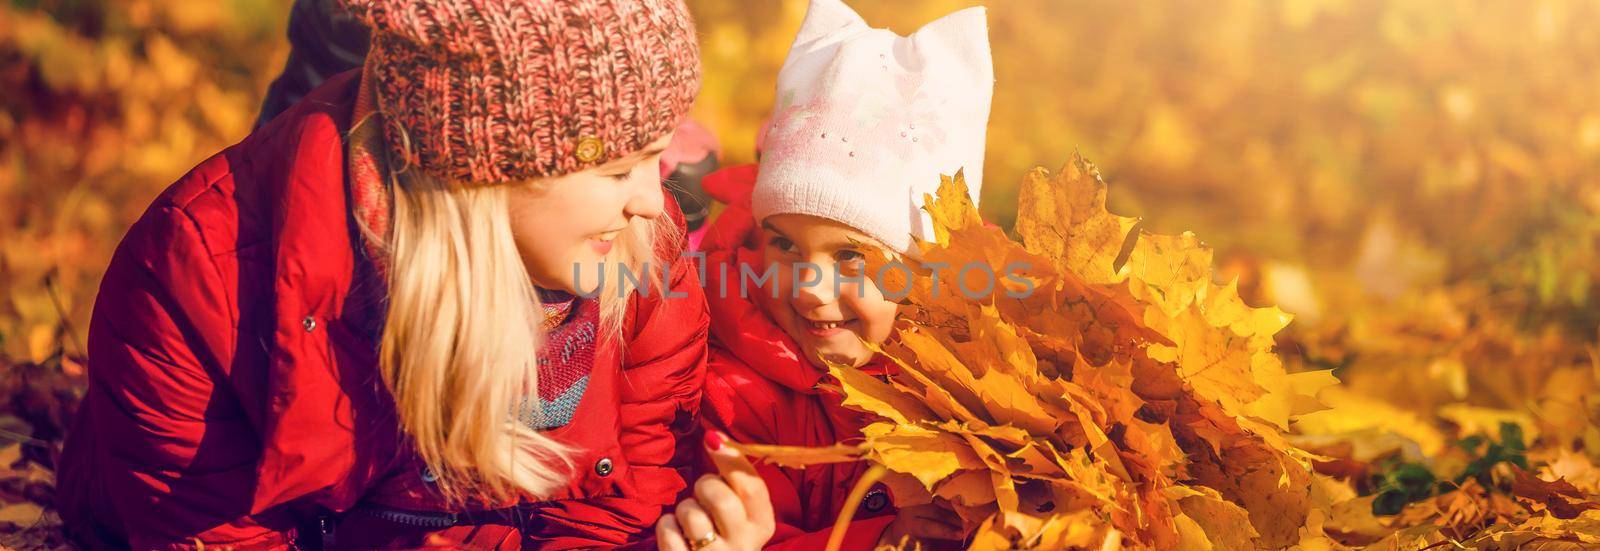 Happy family: mother and child little daughter playing and laughing in the autumn on the nature walk outdoors